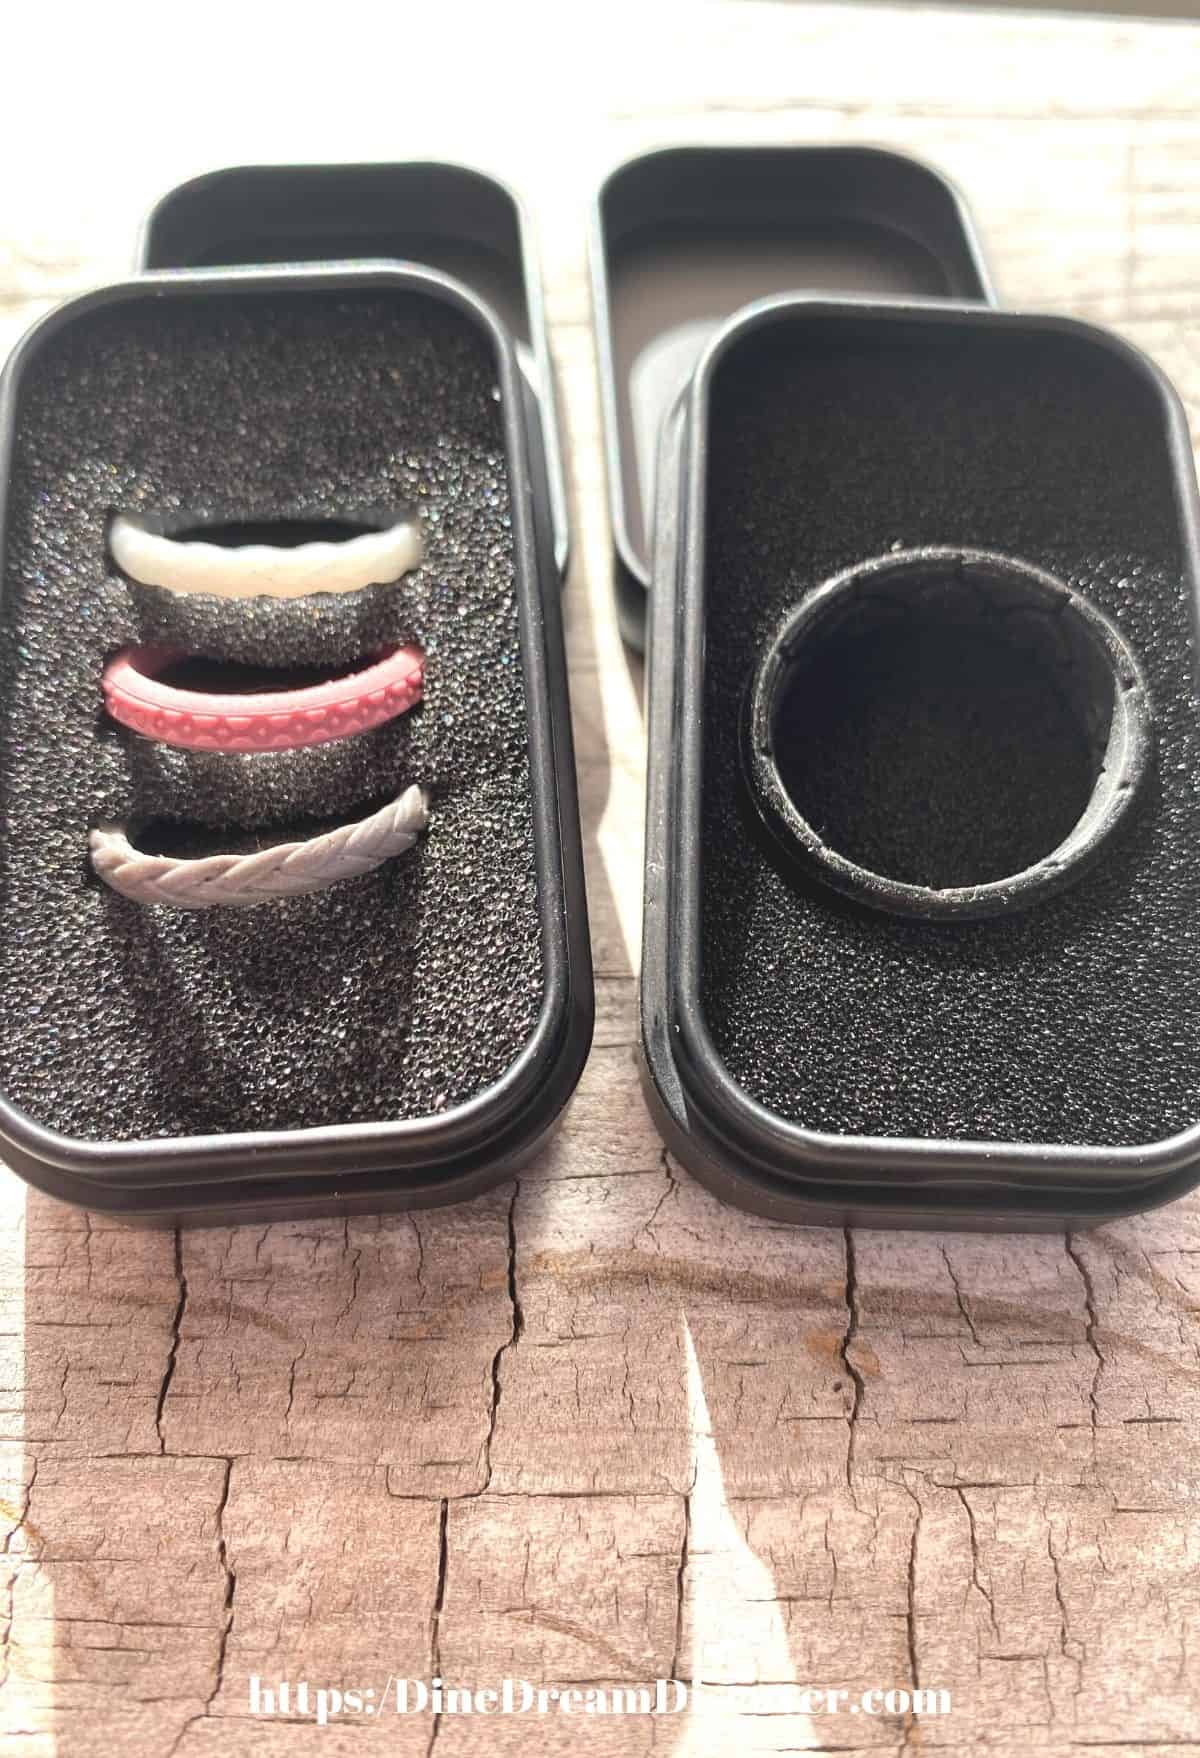 men's and women's silicone bands